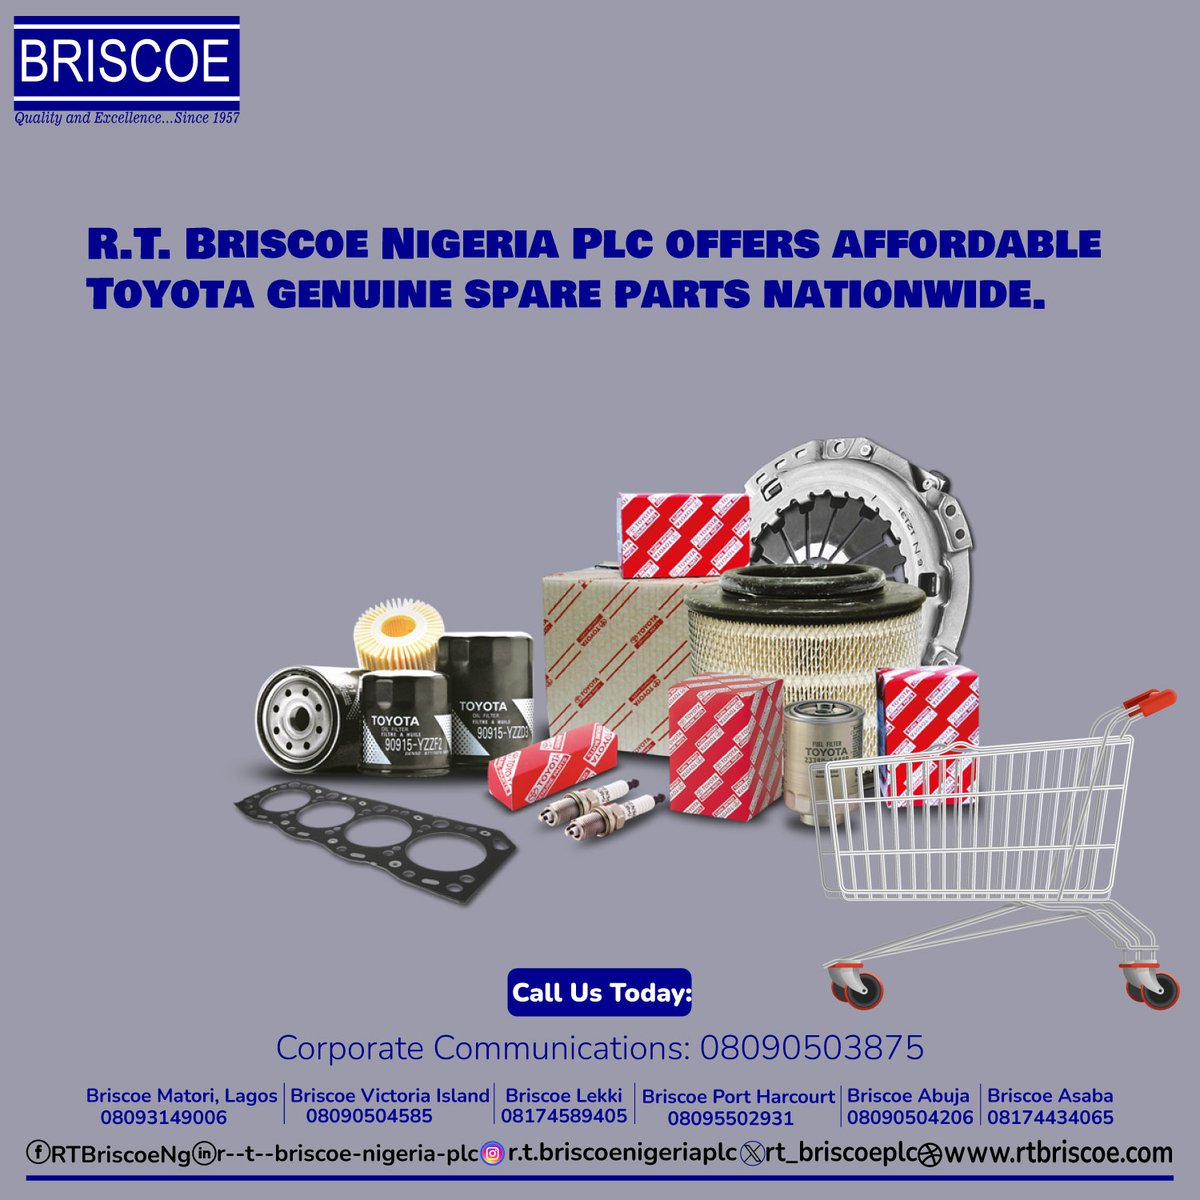 R.T. Briscoe Nigeria Plc offers affordable Toyota genuine spare parts nationwide.

#sparepart #toyota #briscoemotors #rtbriscoenigeriaplc #genuinepart #camry #landcruiser #lc70 #haice #hilux #coaster #belta #corolla #toyotacrown #thursday #nationwide